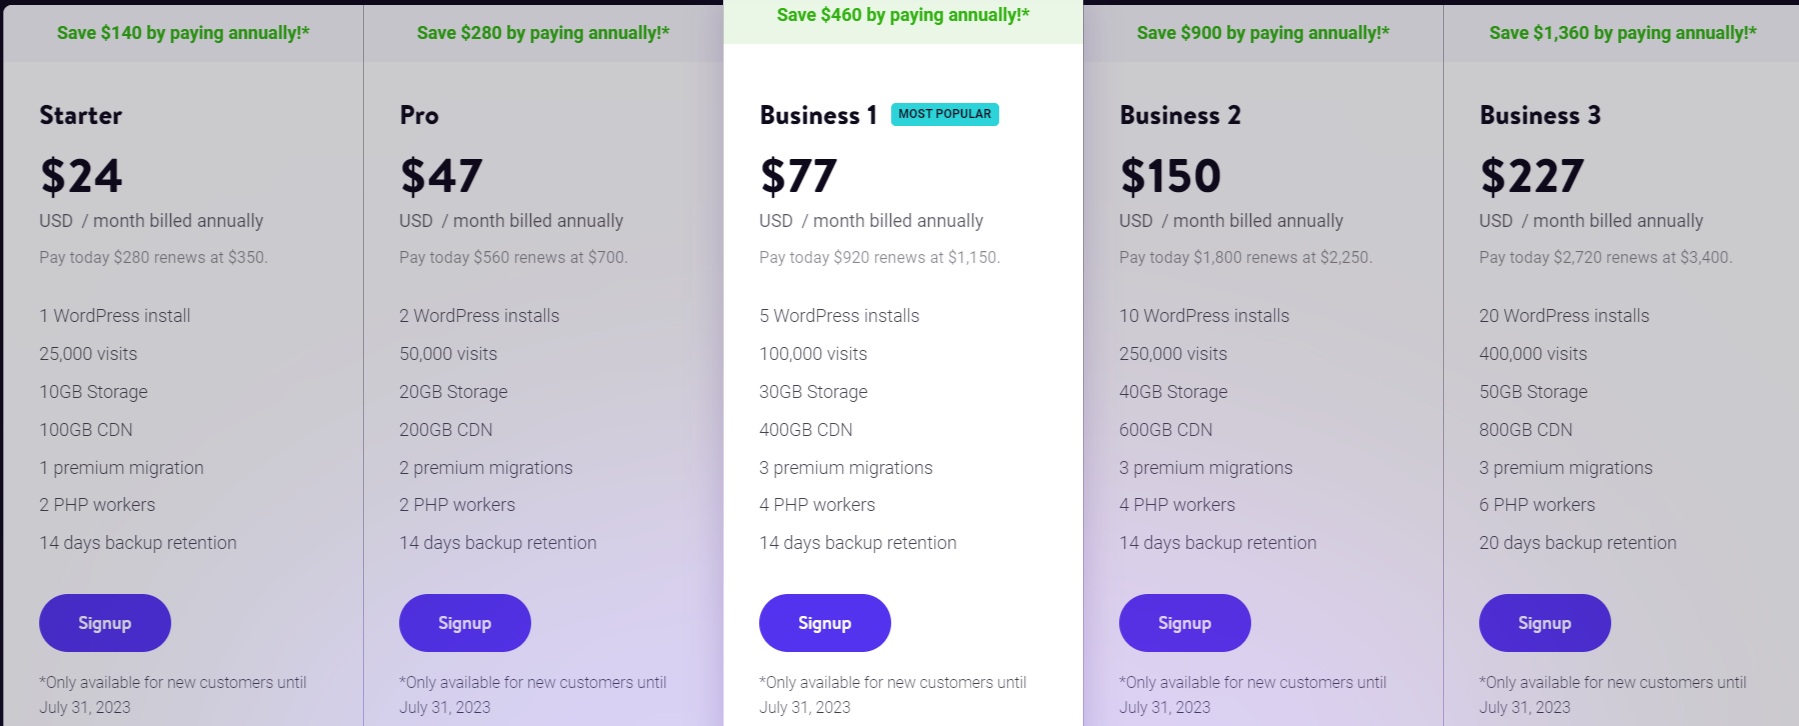 kinsta review - pricing plans 1